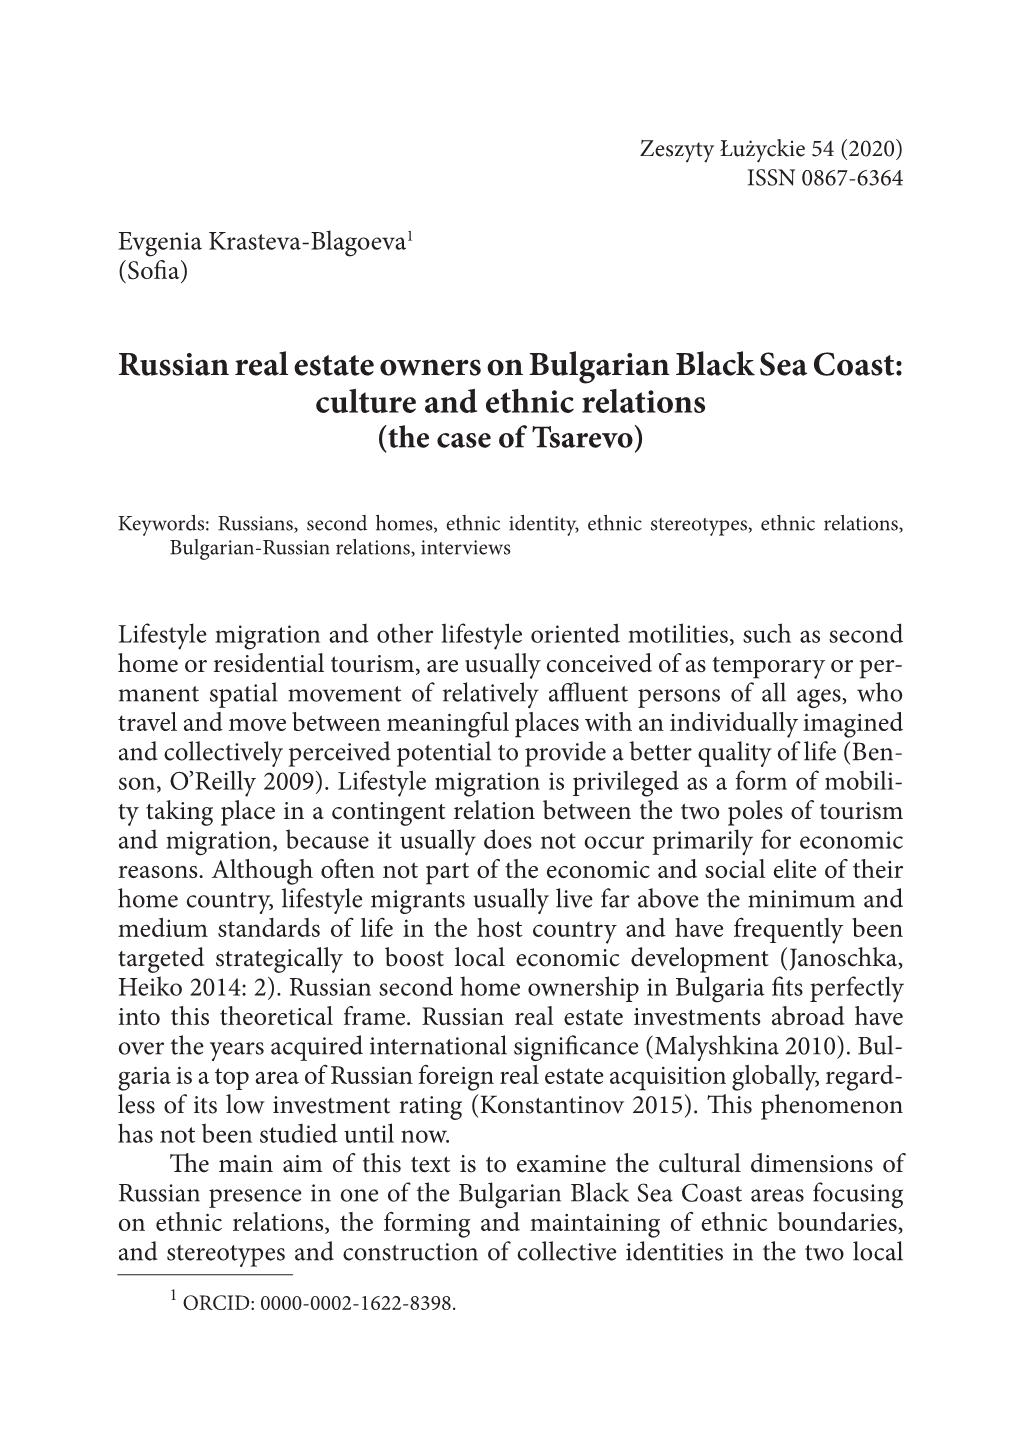 Russian Real Estate Owners on Bulgarian Black Sea Coast: Culture and Ethnic Relations (The Case of Tsarevo)